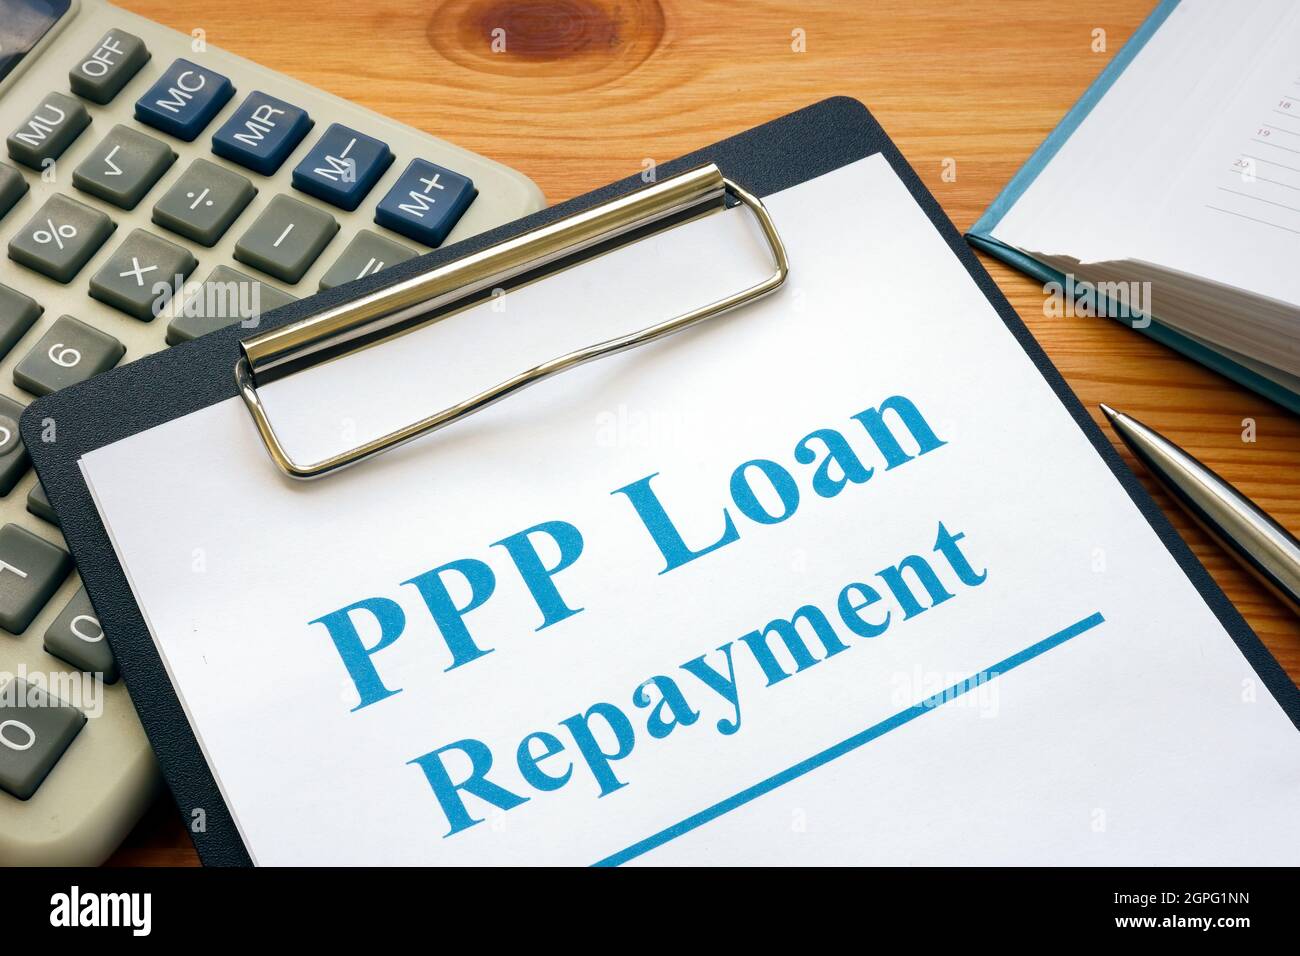 PPP loan repayment form and clipboard with calculator. Stock Photo